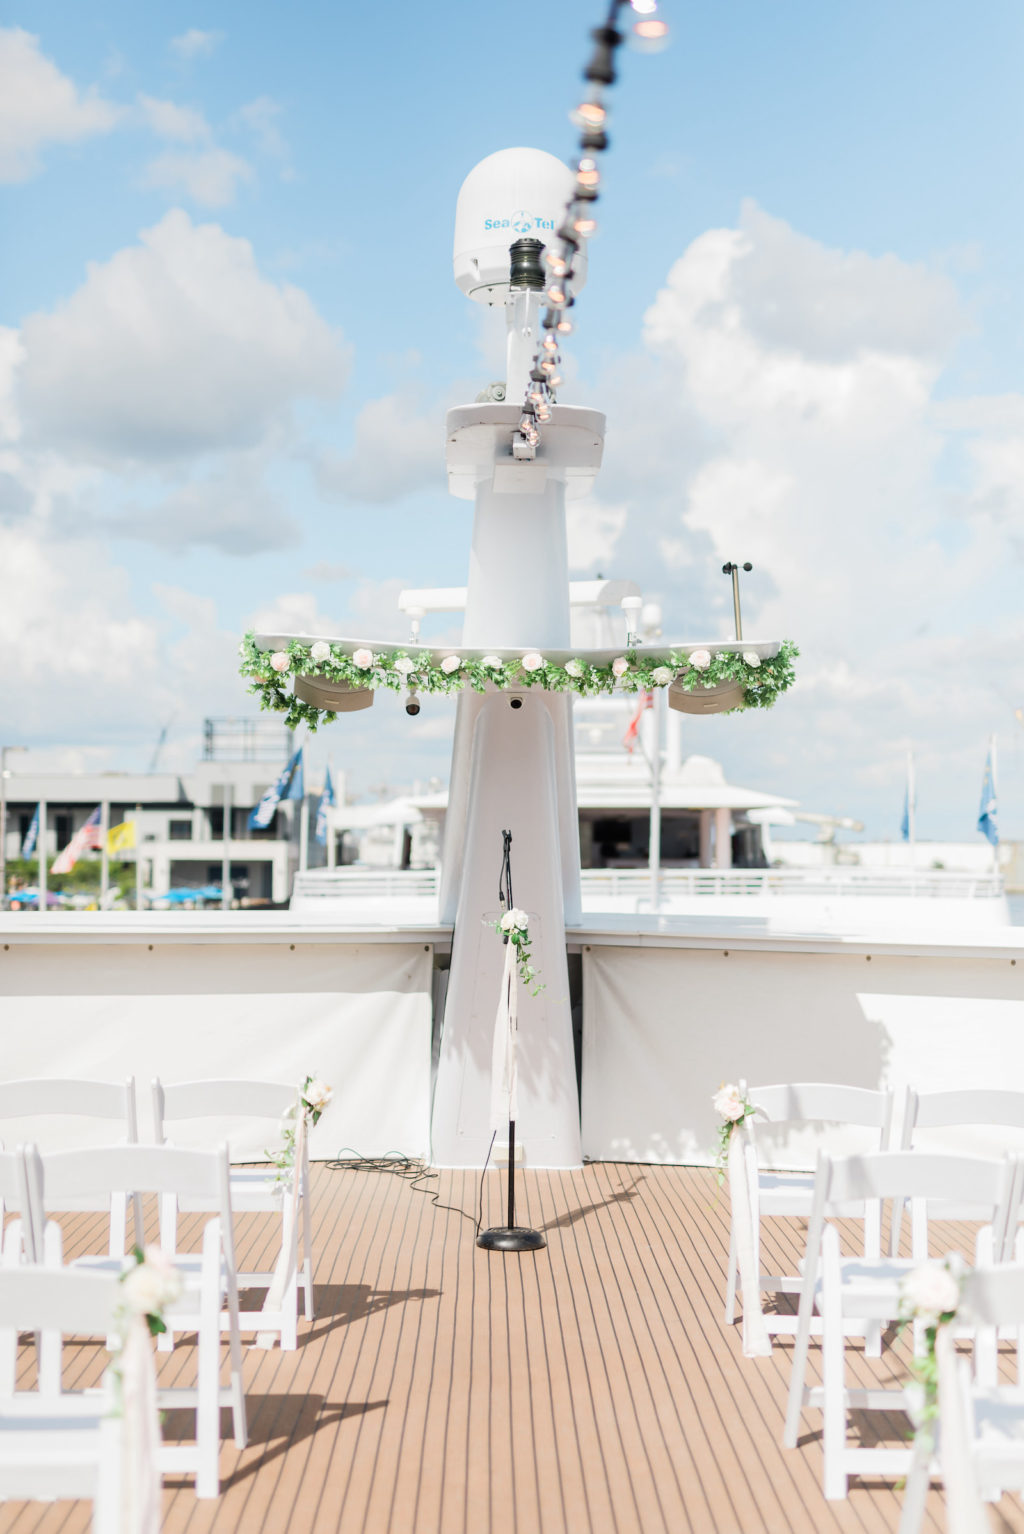 Tampa COVID Wedding at Yacht Starship Venue | Waterfront Wedding Ceremony Ship Boat Deck with White Folding Garden Chairs and Greenery Garland